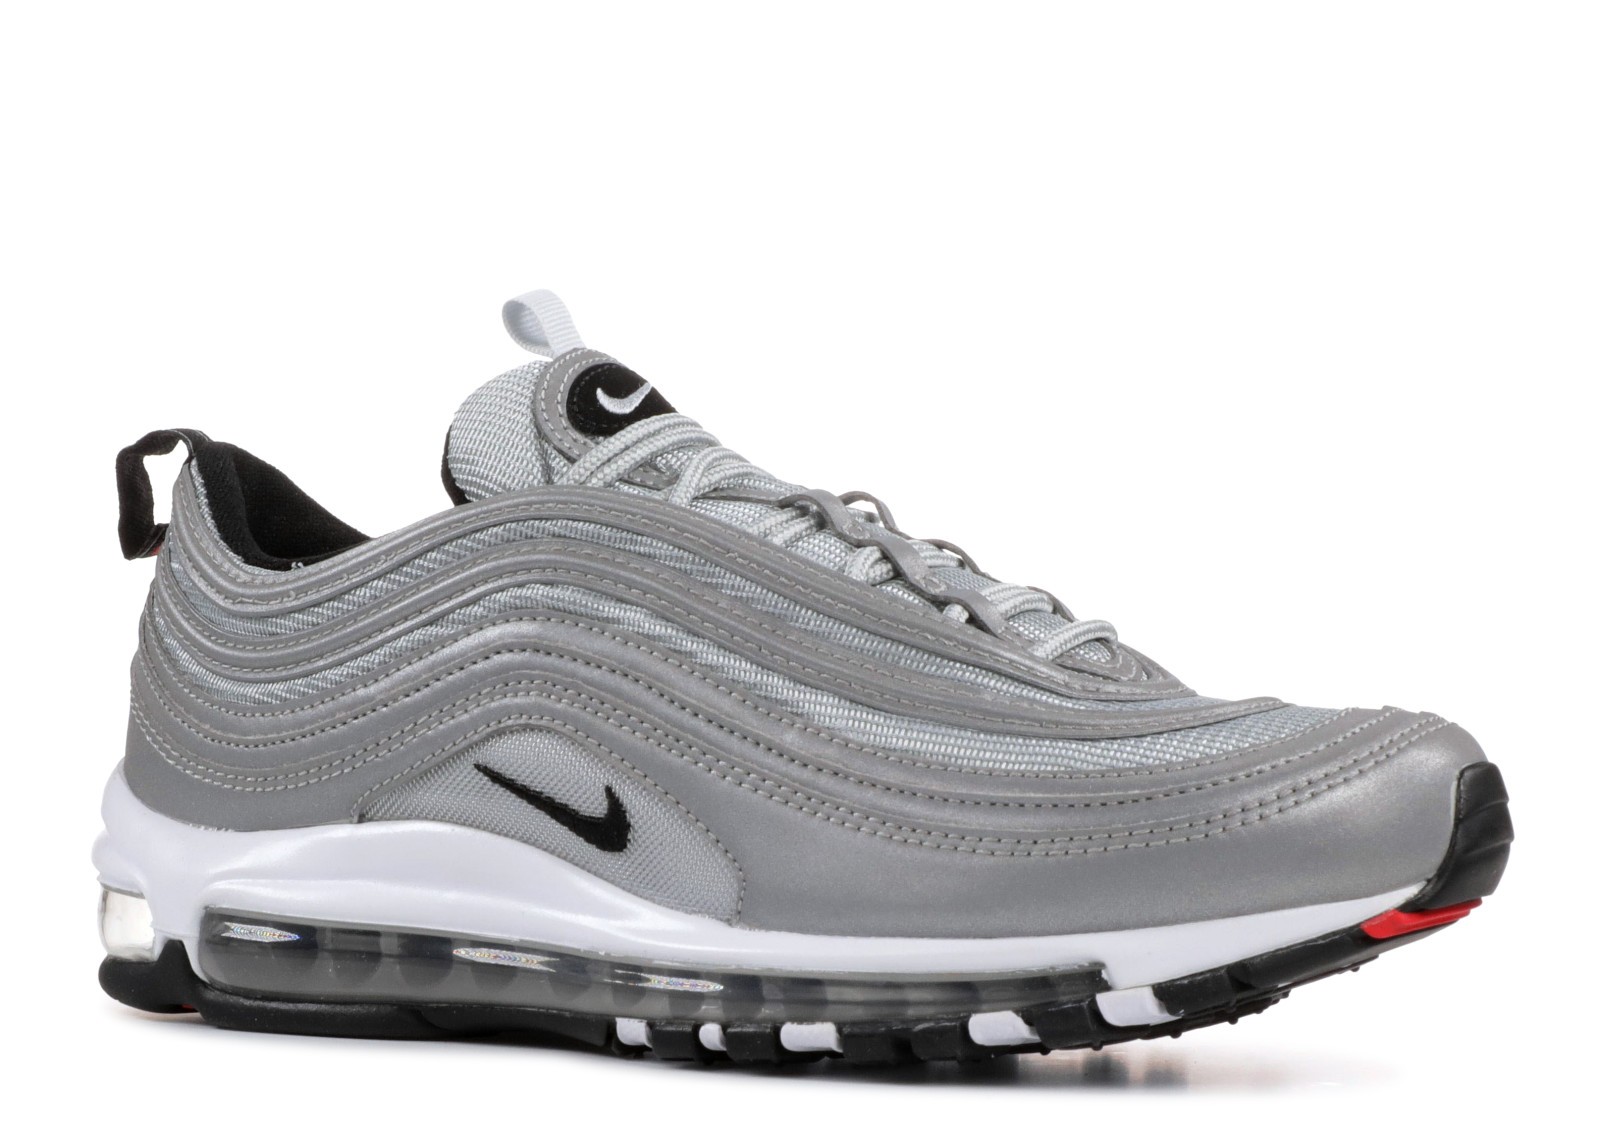 Nike Air Max Premium Reflect Silver Reflect Black Silver 312834 - Shoes will come with original receipt from Nike - 007 - GmarShops